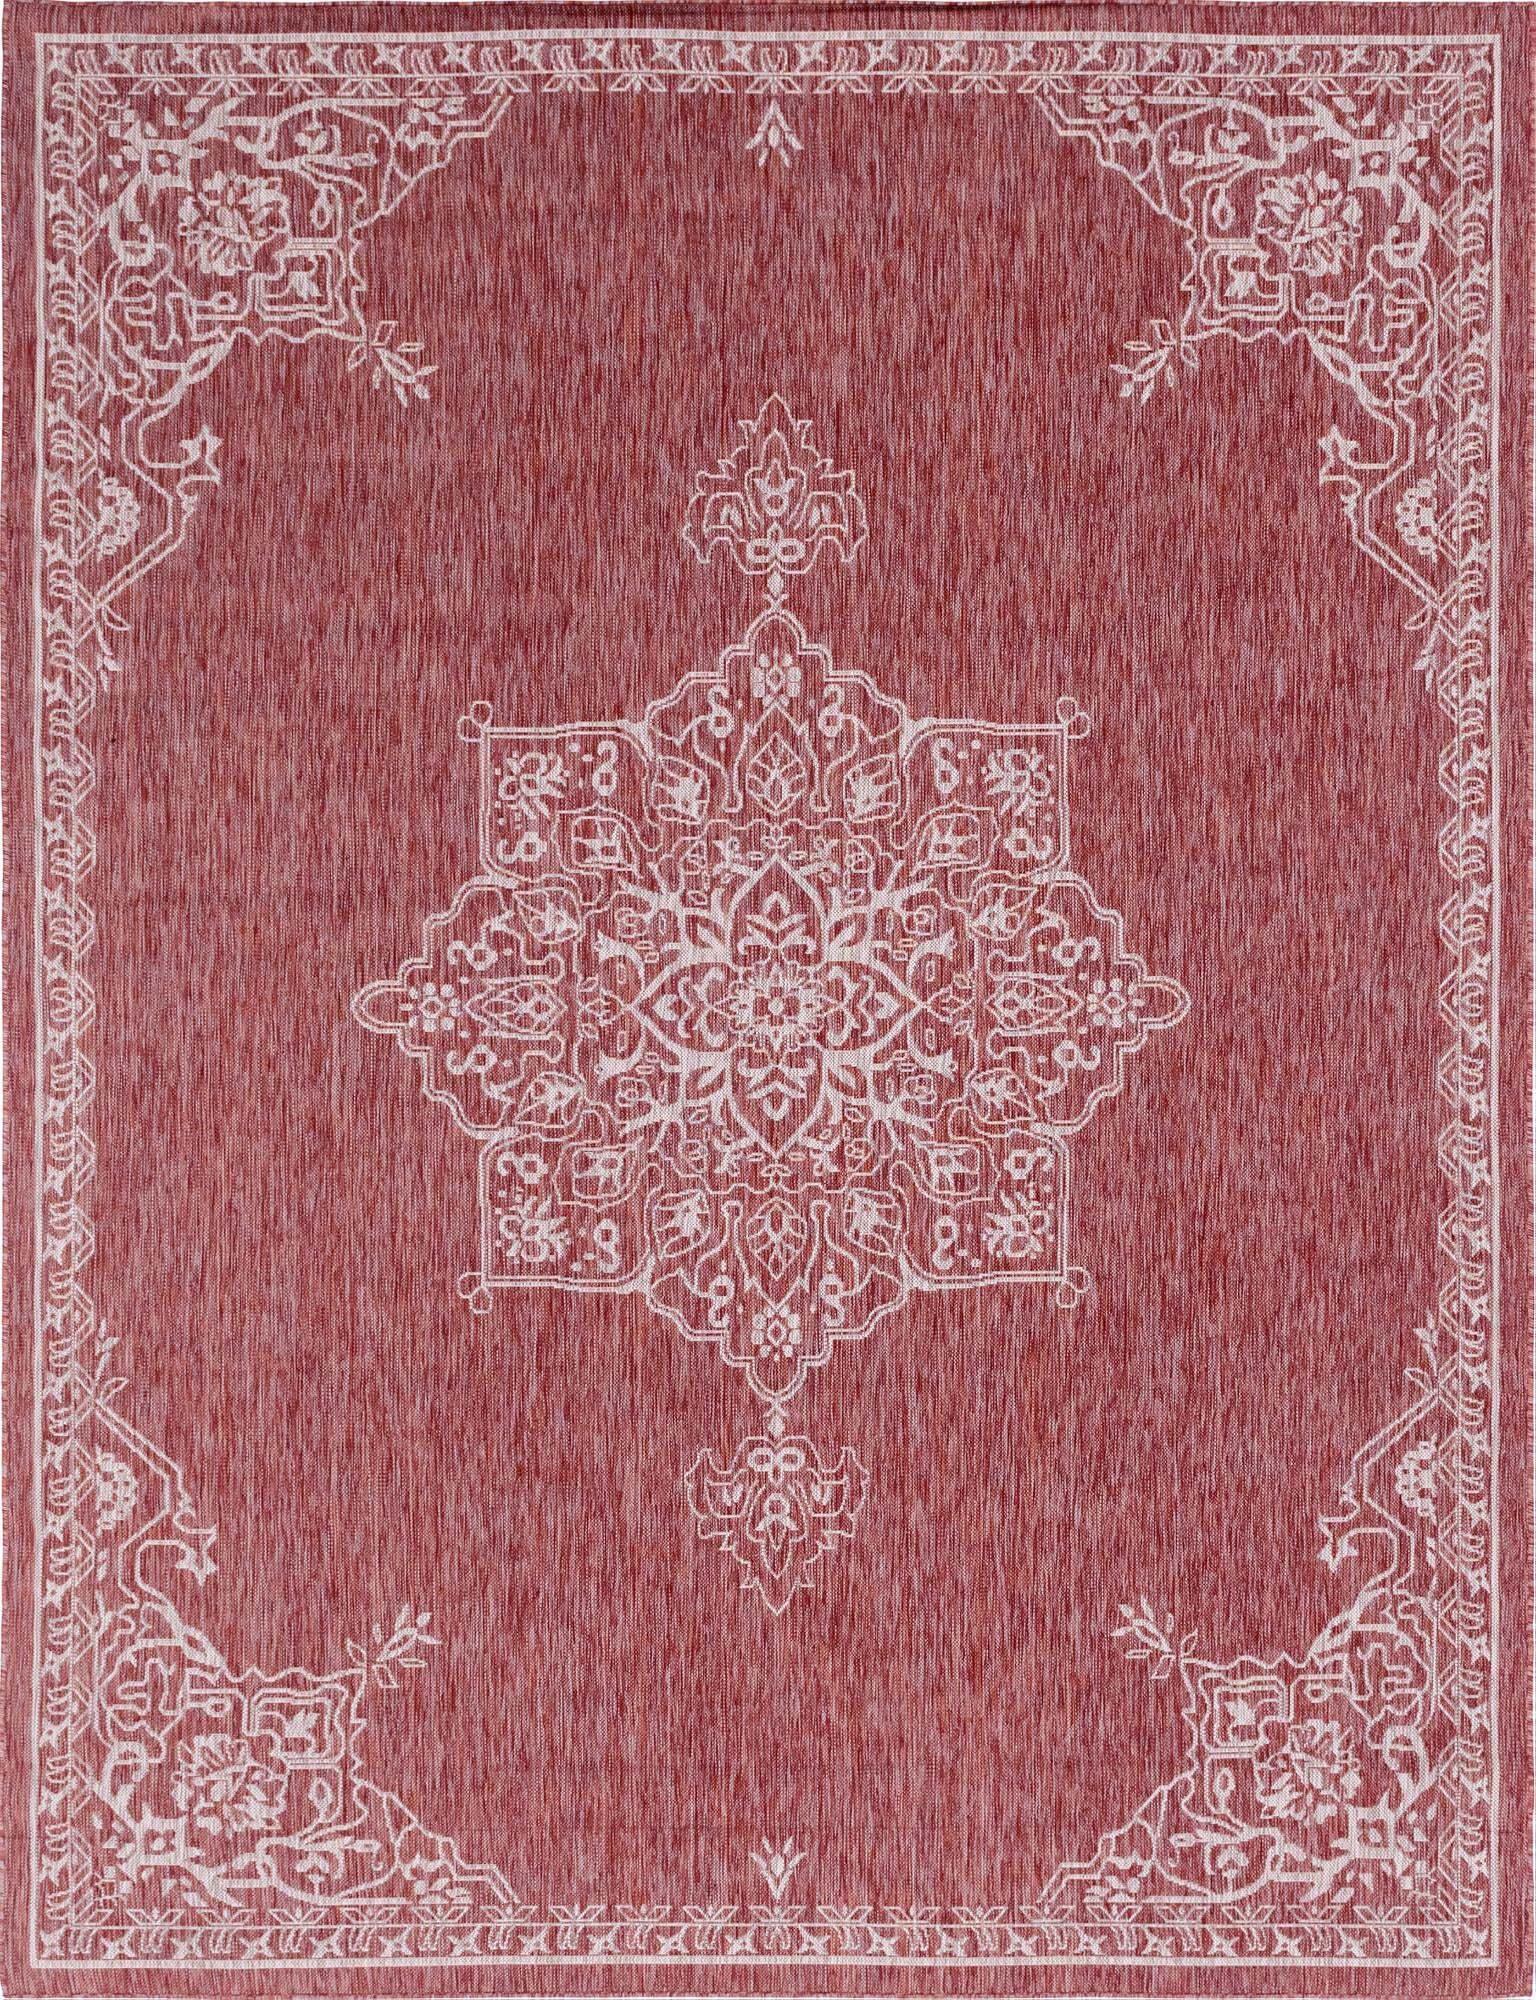 Unique Loom Outdoor Rugs - Outdoor Traditional Medallion Rectangular 9x12 Rug Rust Red & Gray